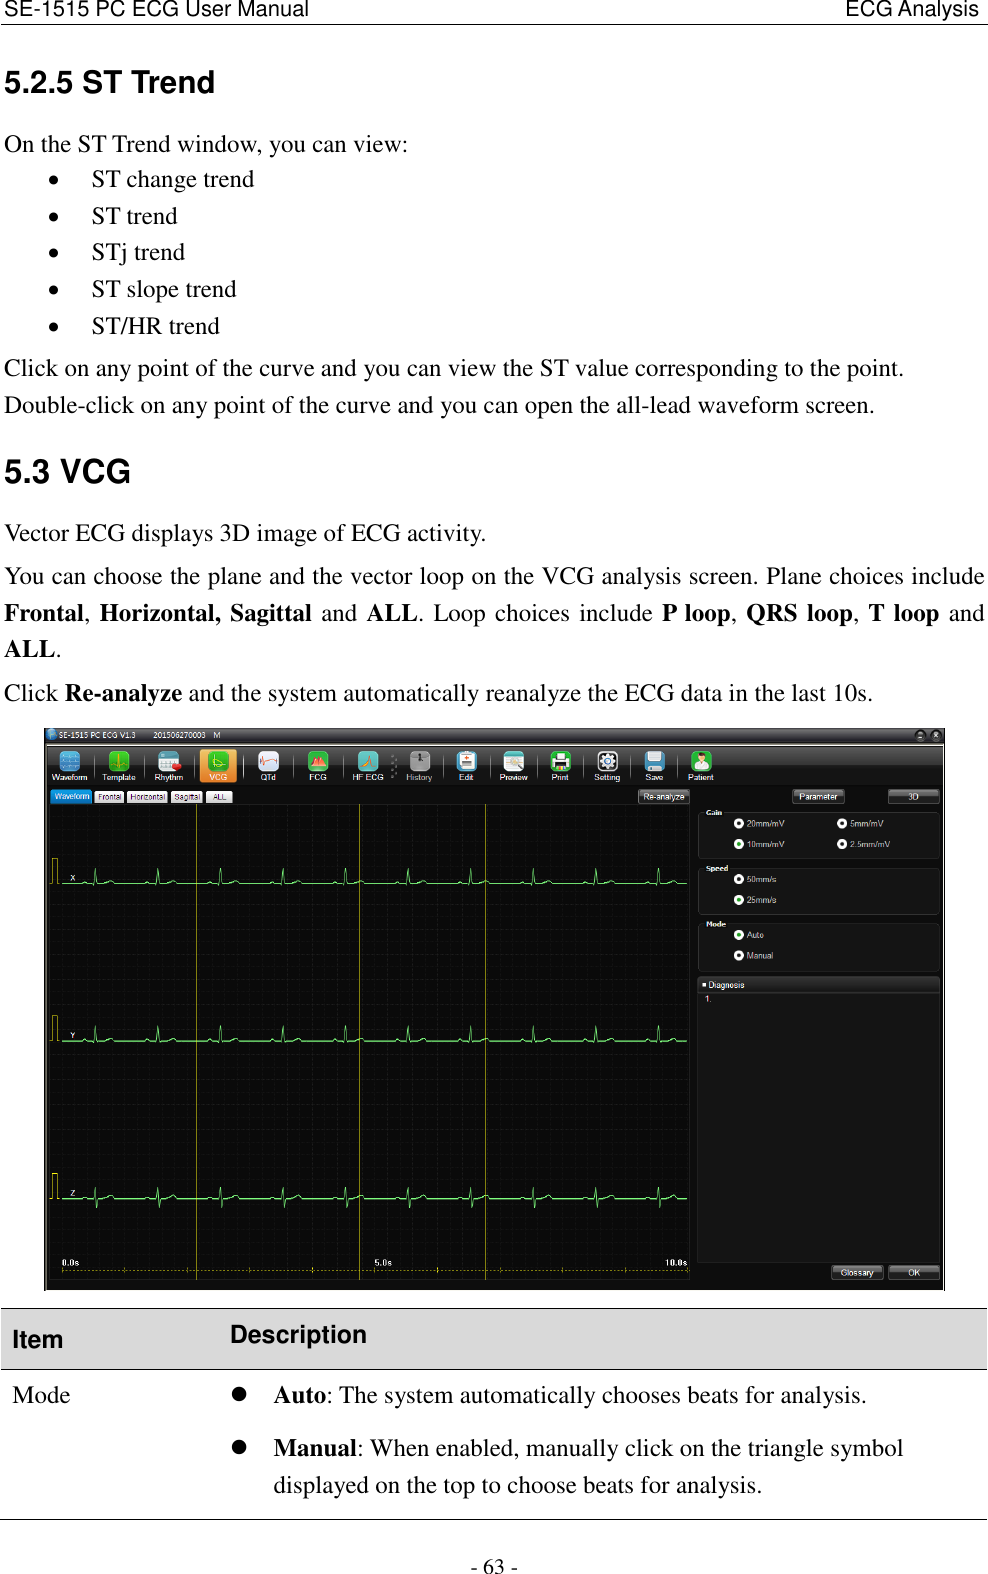 SE-1515 PC ECG User Manual                                                                                                  ECG Analysis - 63 - 5.2.5 ST Trend On the ST Trend window, you can view:  ST change trend  ST trend  STj trend  ST slope trend  ST/HR trend Click on any point of the curve and you can view the ST value corresponding to the point. Double-click on any point of the curve and you can open the all-lead waveform screen. 5.3 VCG Vector ECG displays 3D image of ECG activity. You can choose the plane and the vector loop on the VCG analysis screen. Plane choices include Frontal, Horizontal, Sagittal and ALL. Loop choices include P loop, QRS loop, T loop and ALL. Click Re-analyze and the system automatically reanalyze the ECG data in the last 10s.   Item Description Mode  Auto: The system automatically chooses beats for analysis.  Manual: When enabled, manually click on the triangle symbol displayed on the top to choose beats for analysis. 